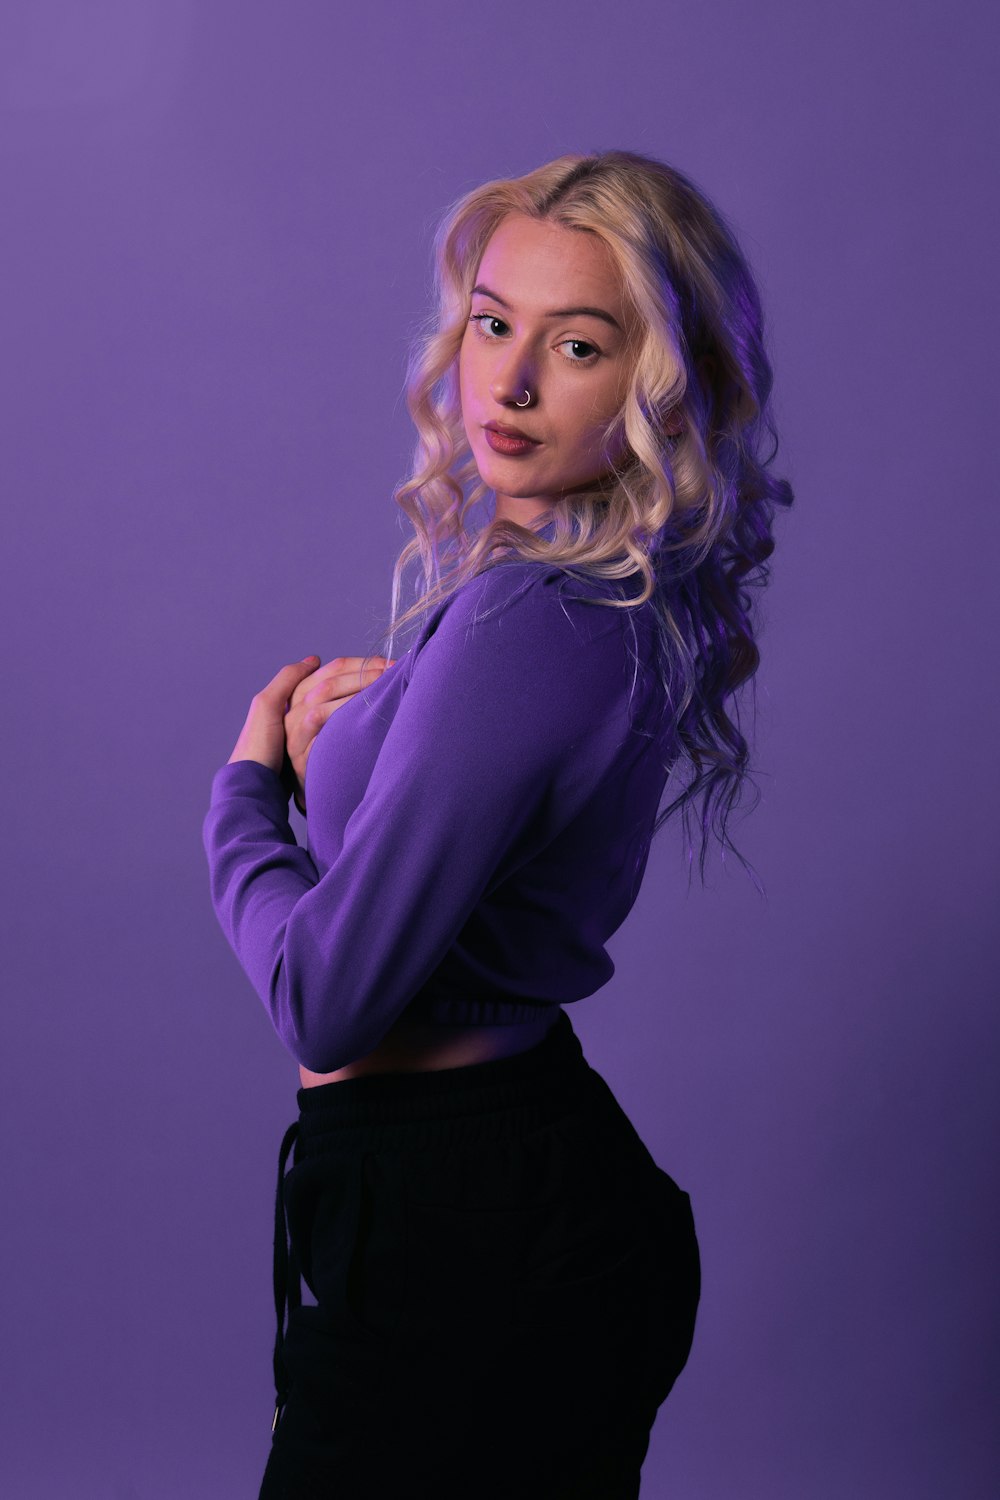 a woman in a purple shirt posing for a picture